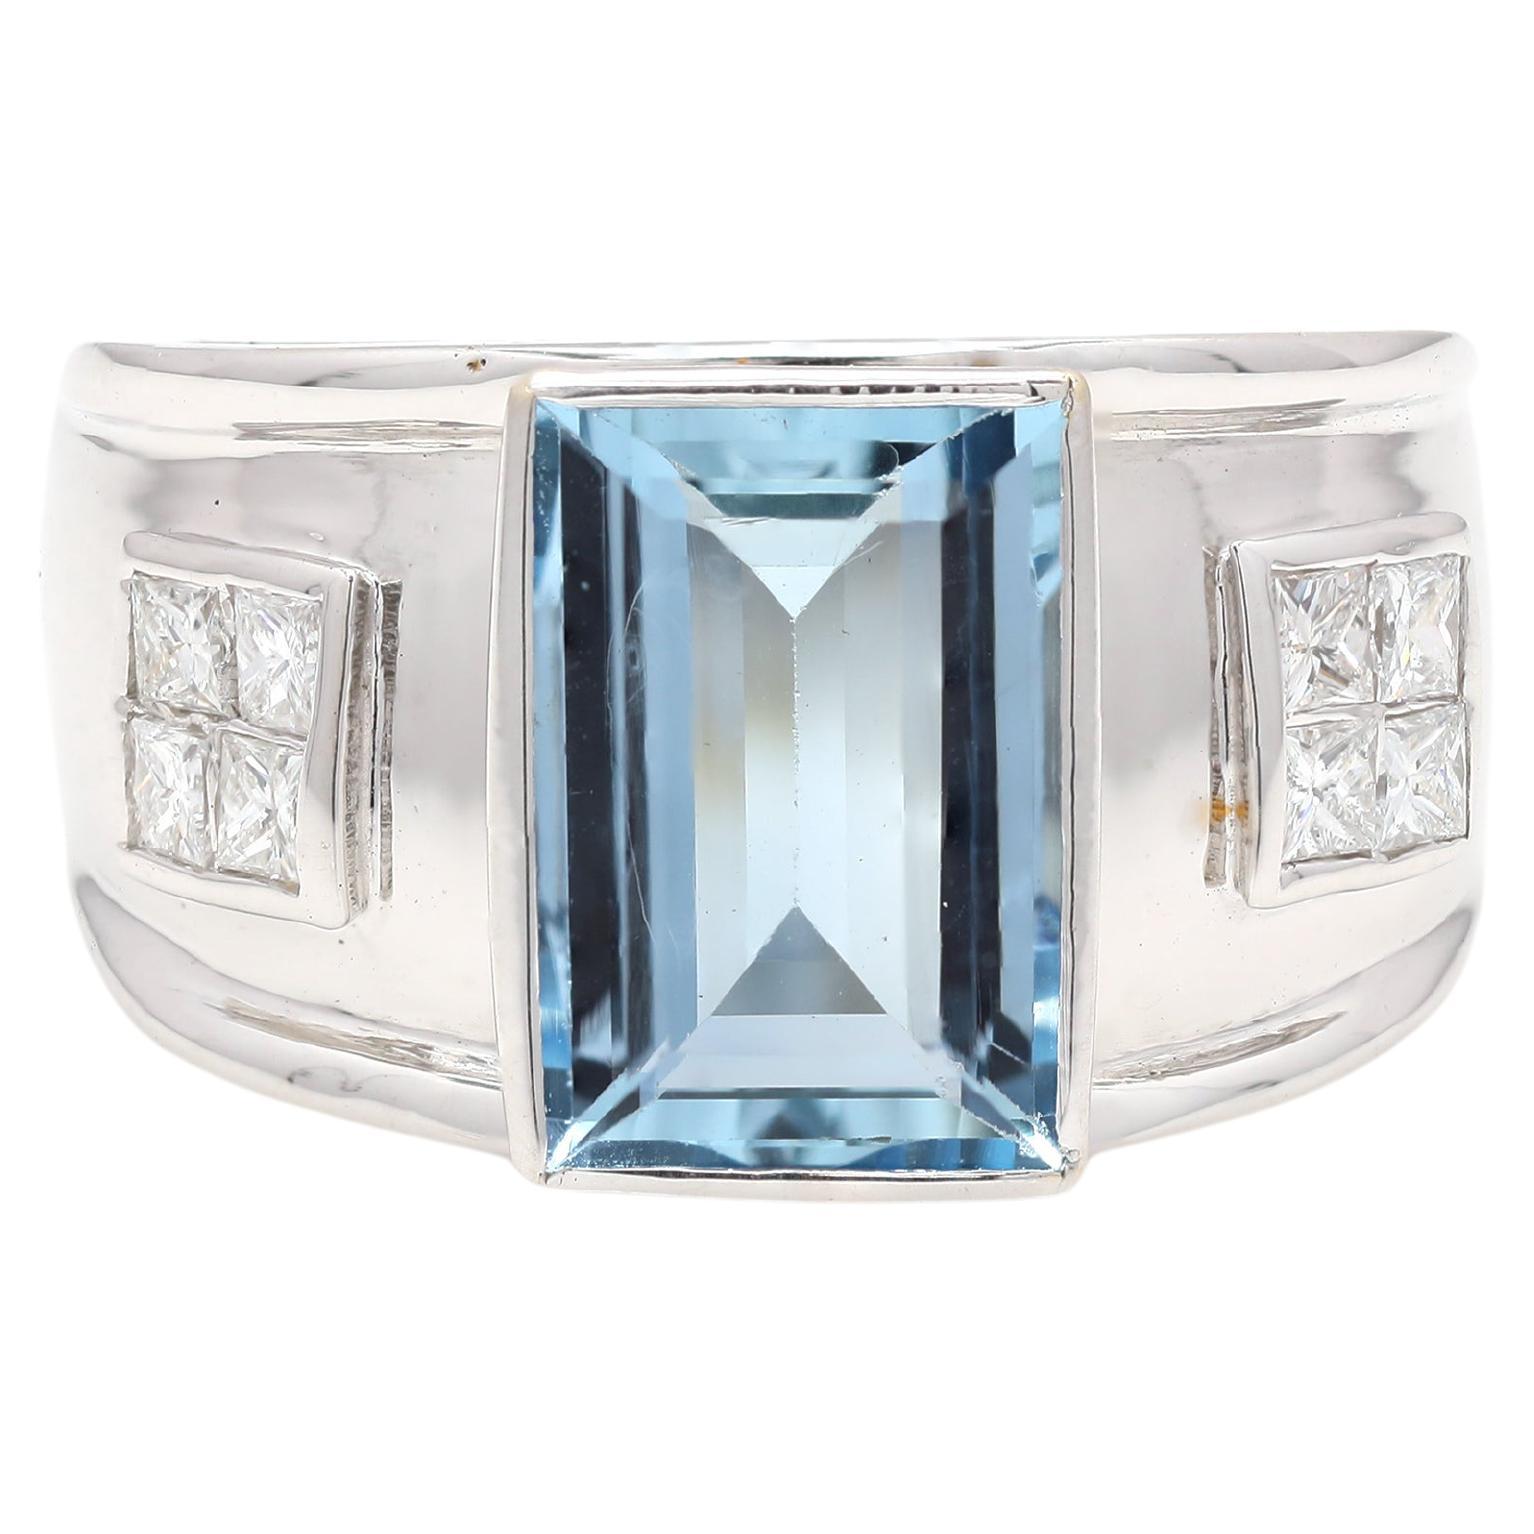 For Sale:  Statement 5.6 Carat Aquamarine Men's Ring with Diamonds in 18K White Gold